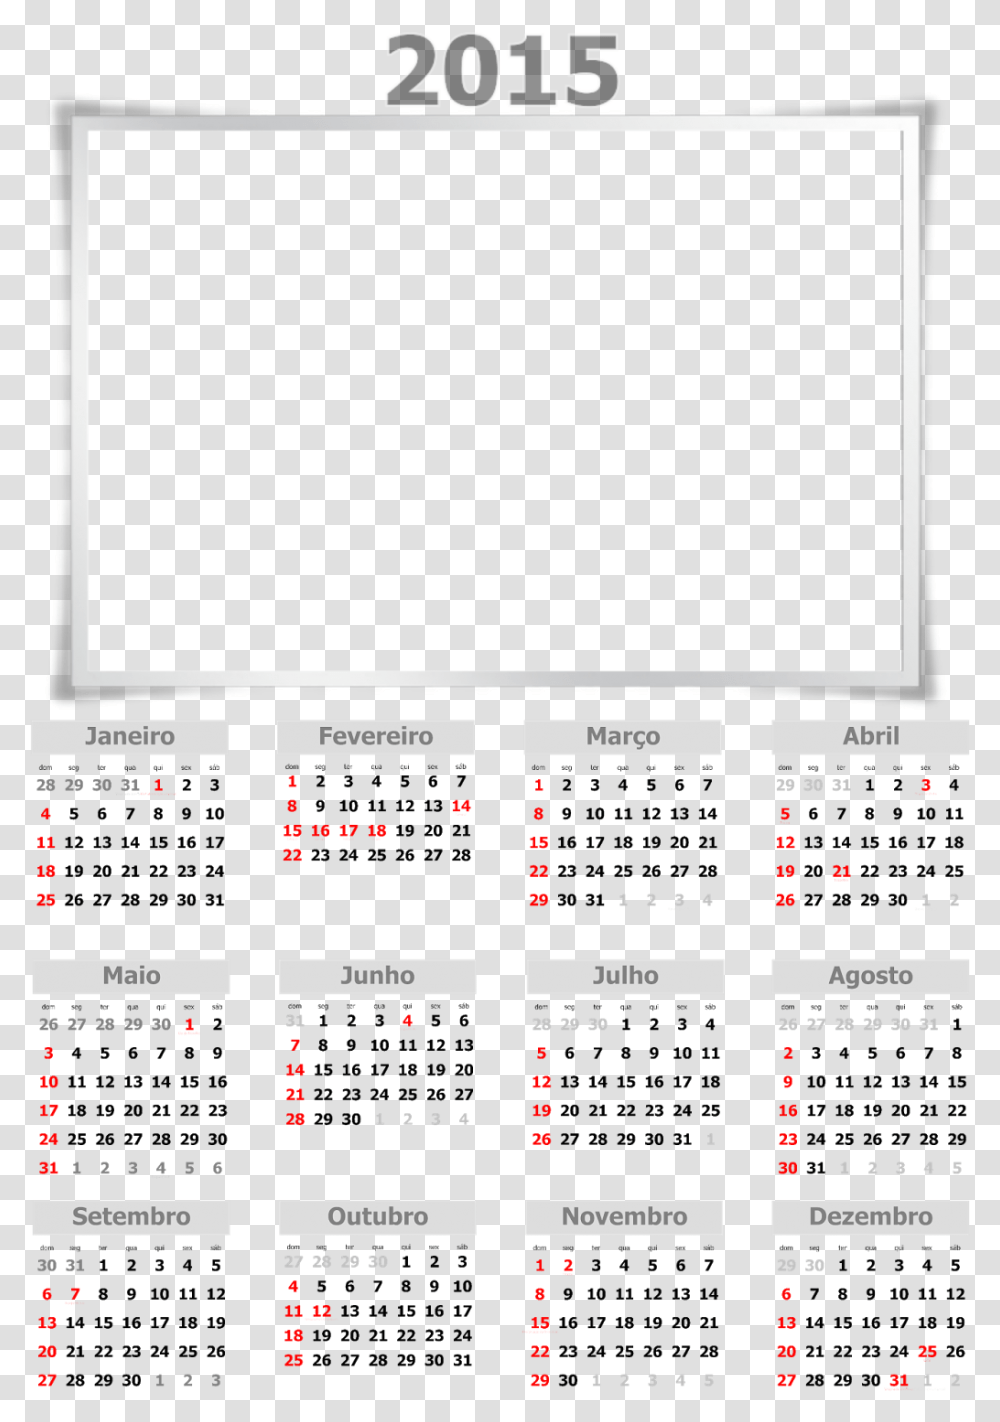 Search Results For Calendario 2015 Vector Pngpage2 Calendar 2020 With Singapore Holidays, Monitor, Screen, Electronics Transparent Png